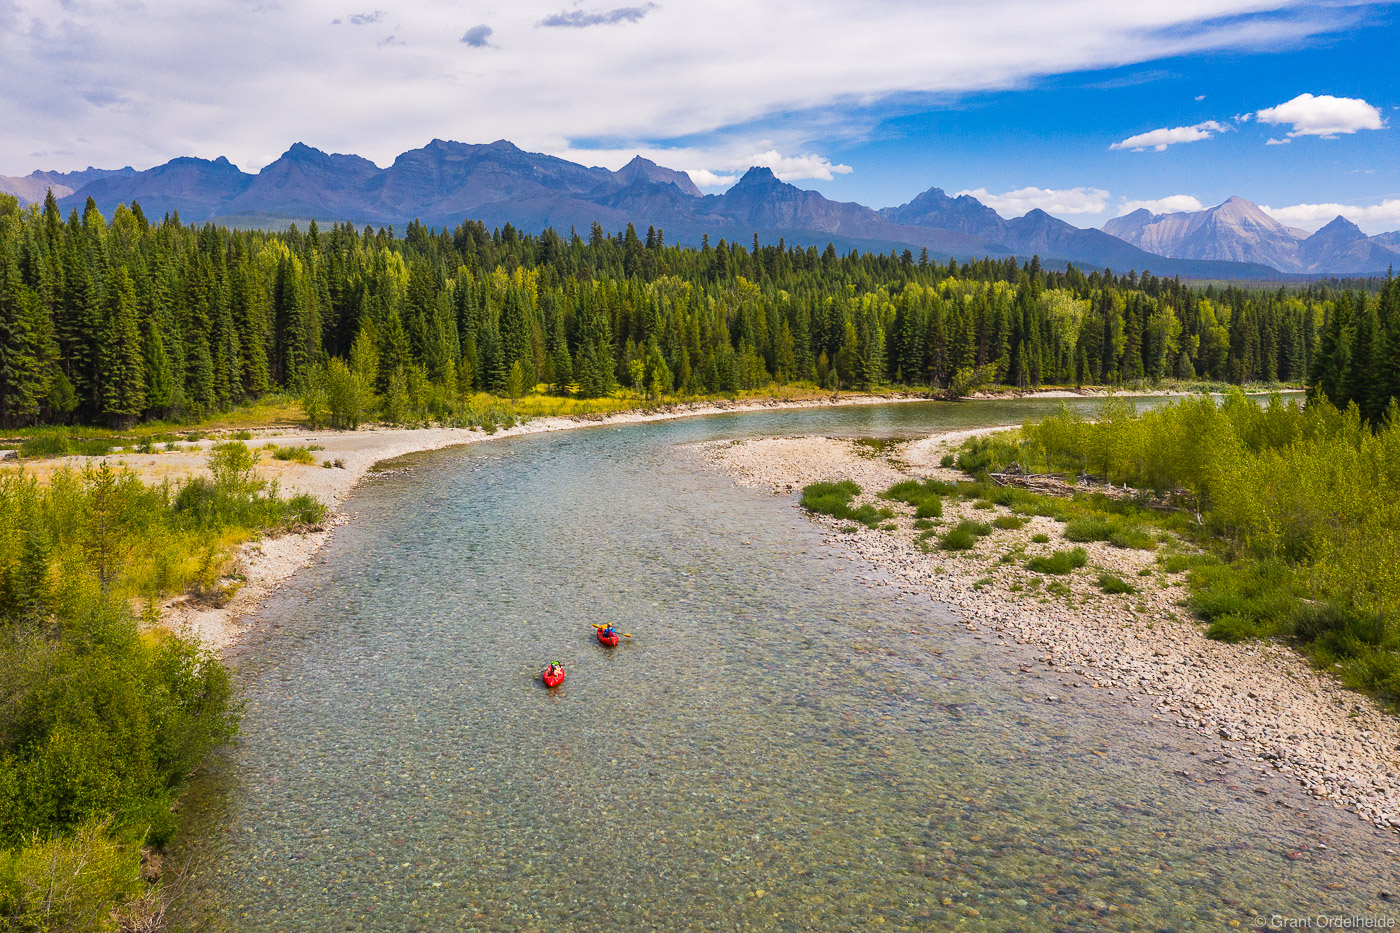 A couple of packrafters floating the North Fork of the Flathead river near Glacier National Park.